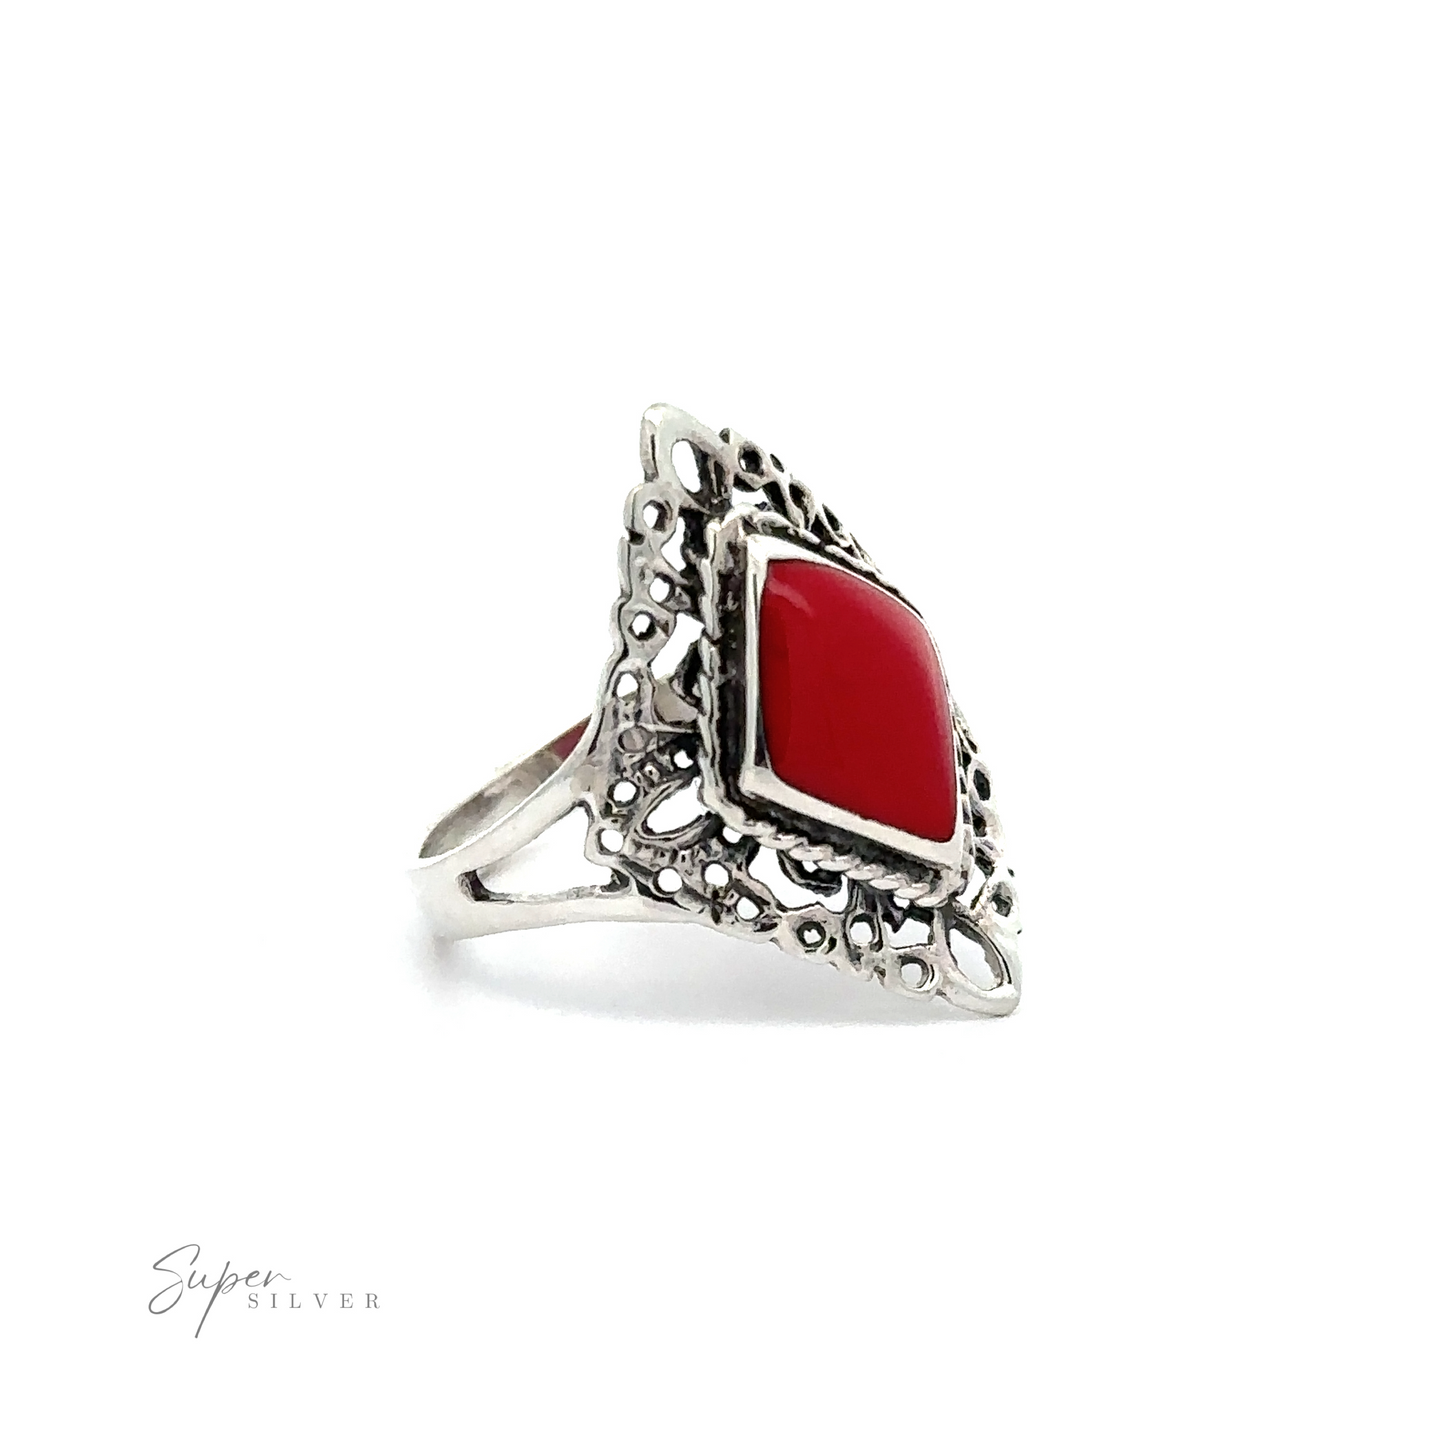 
                  
                    A Diamond Shaped Filigree Ring with Inlaid Stones with a silver band adorned with lacy filigree, featuring a low profile red stone.
                  
                